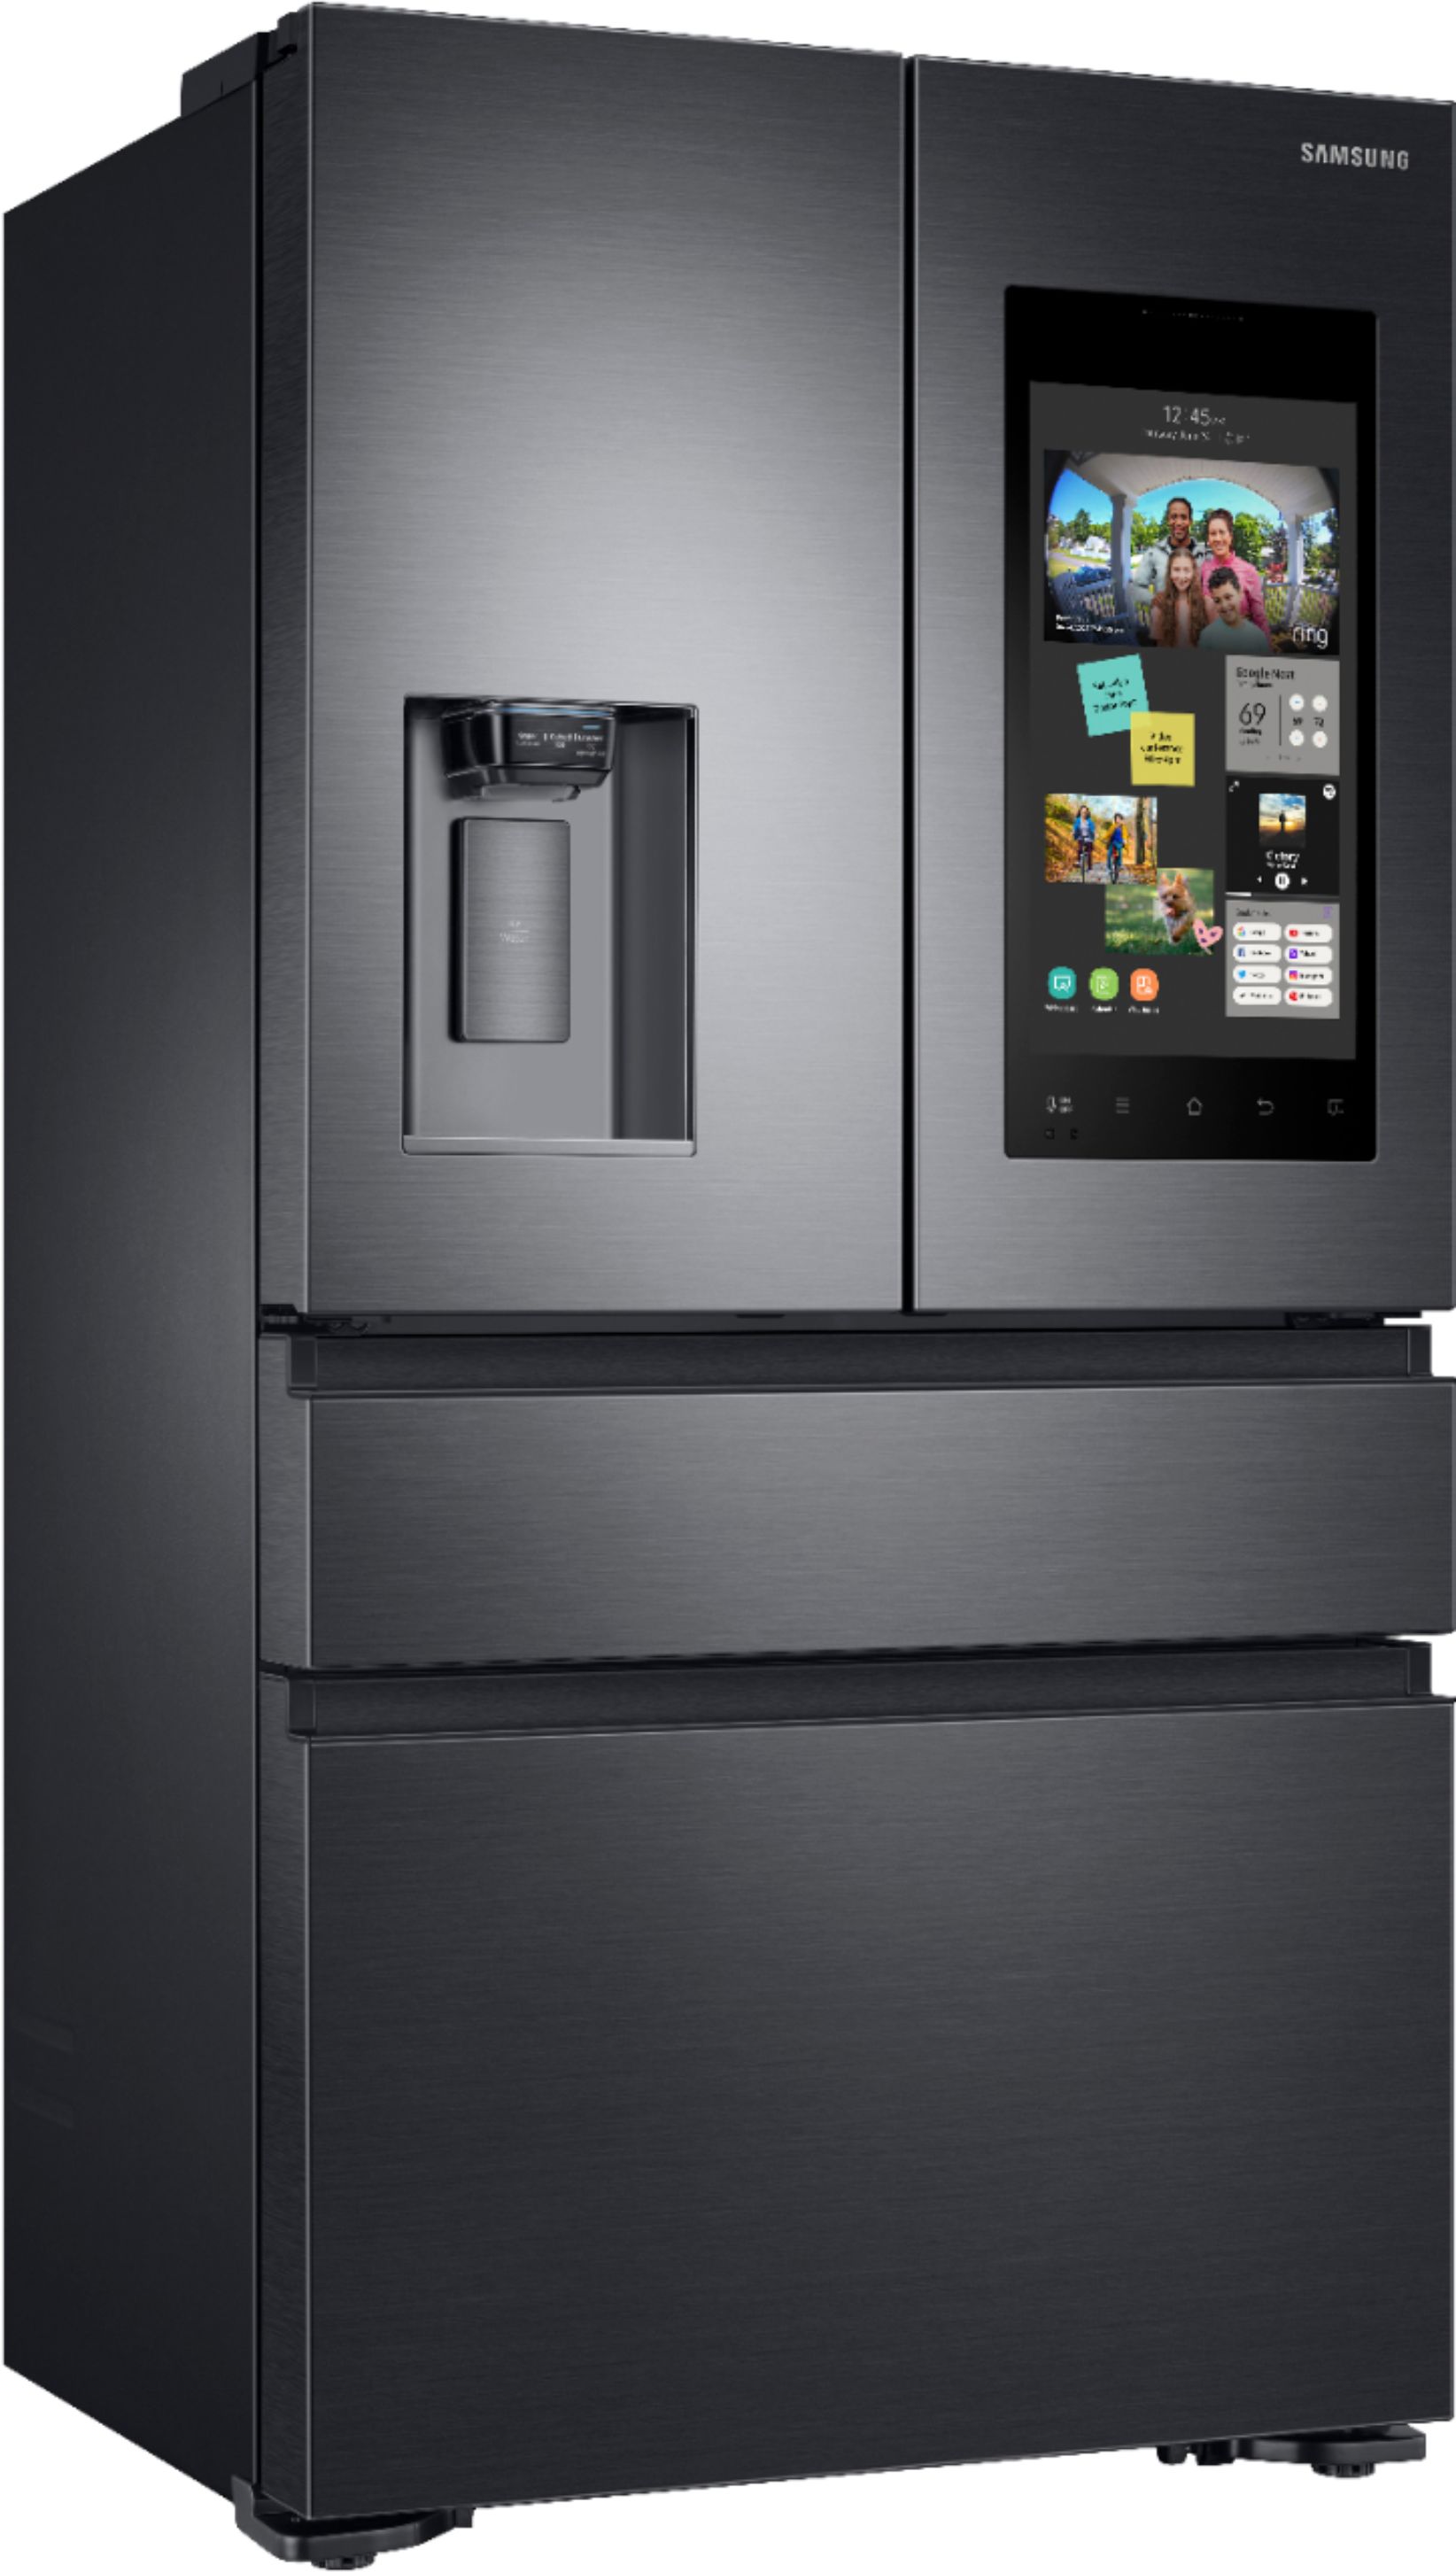 Angle View: Samsung - Family Hub 22.2 Cu. Ft. Counter Depth 4-Door French Fingerprint Resistant Refrigerator - Black stainless steel